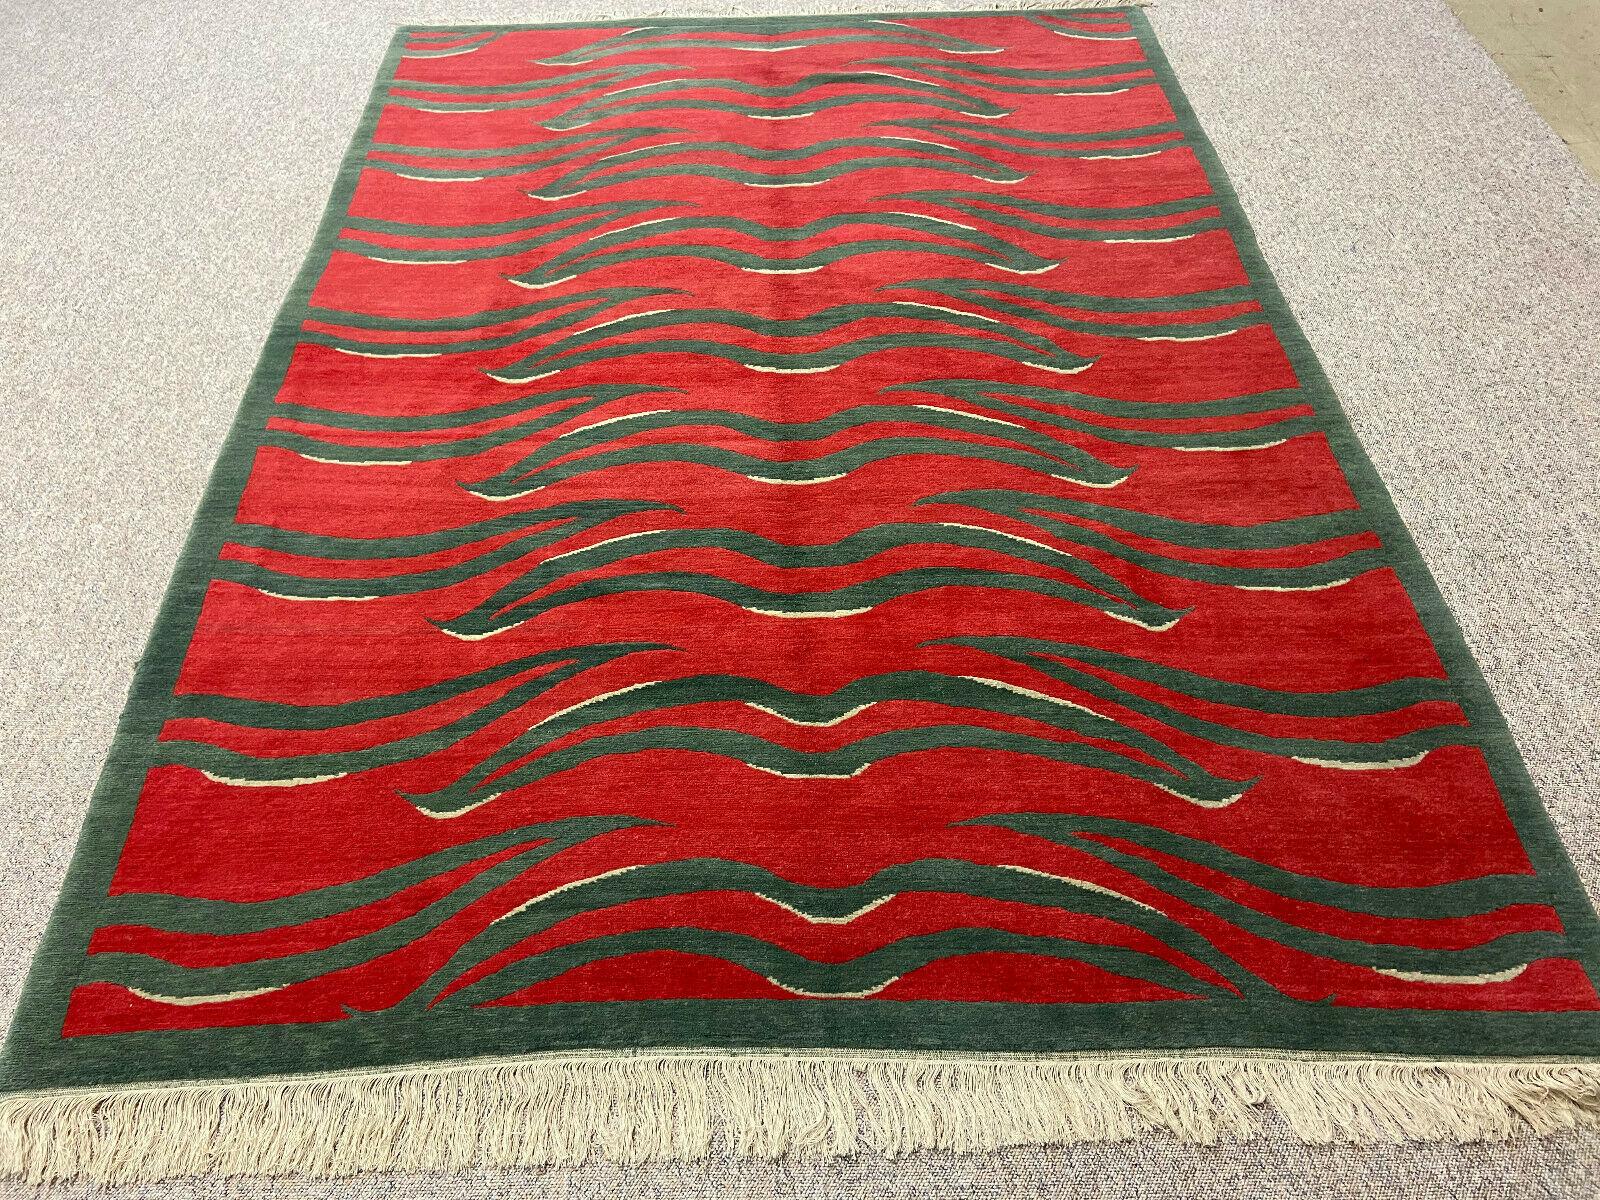 Art Deco Tibetan Tiger Rug Pure Wool Hand Knotted Red Green by Djoharian Collection For Sale